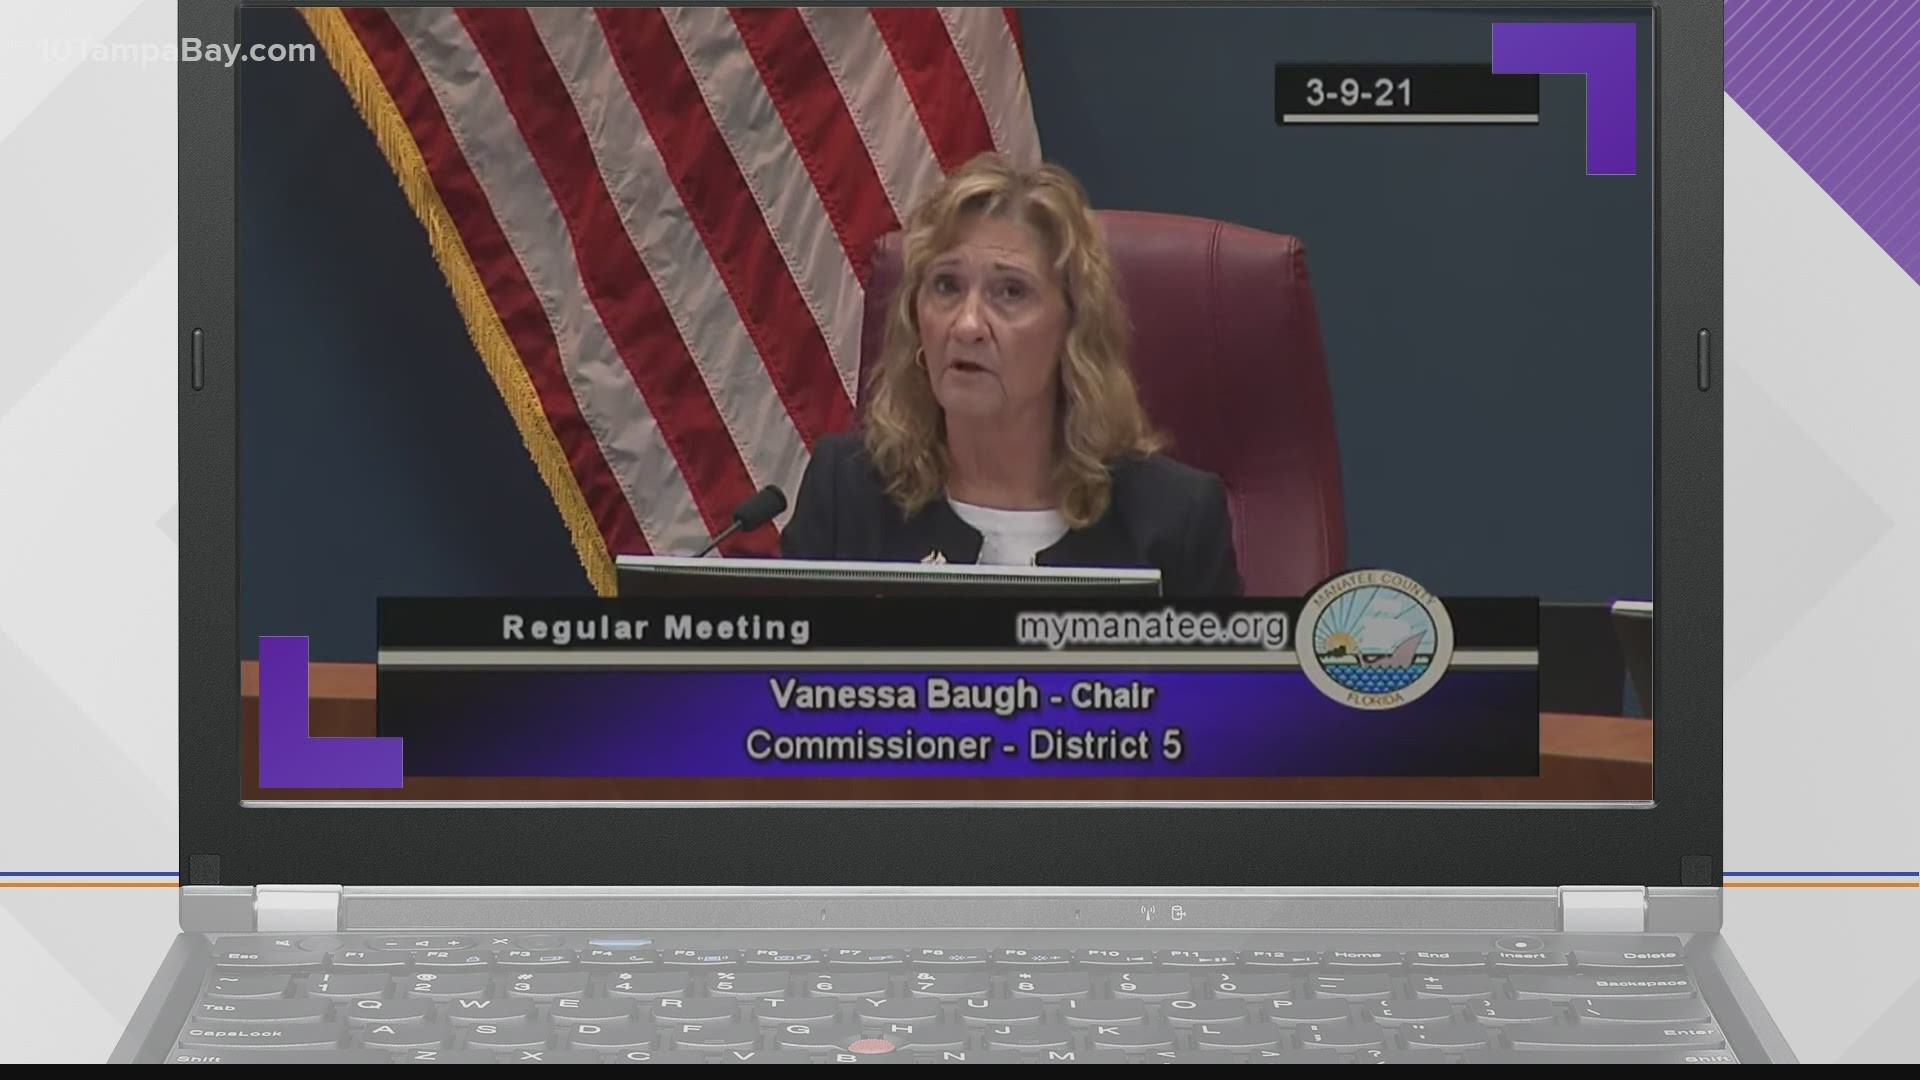 Manatee County Commission Chair Vanessa Baugh, who has faced calls to step down, texted: "After all, 22 is right around the corner."